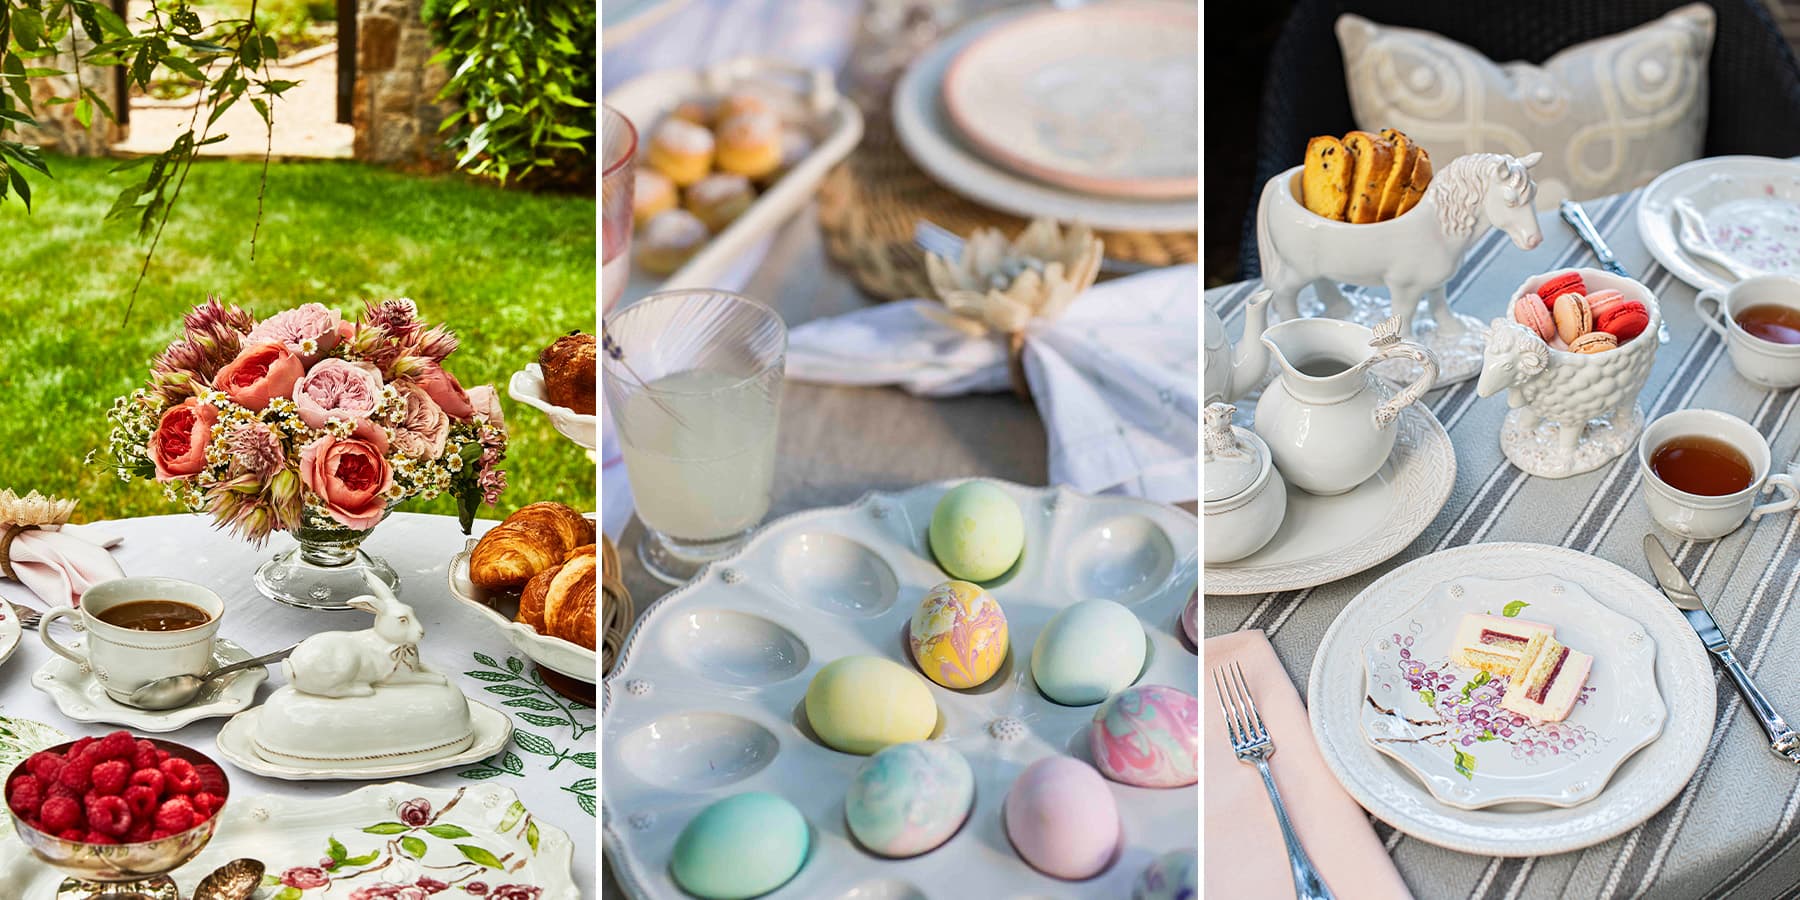 Create an Easter tablescape alive with playful serving pieces.